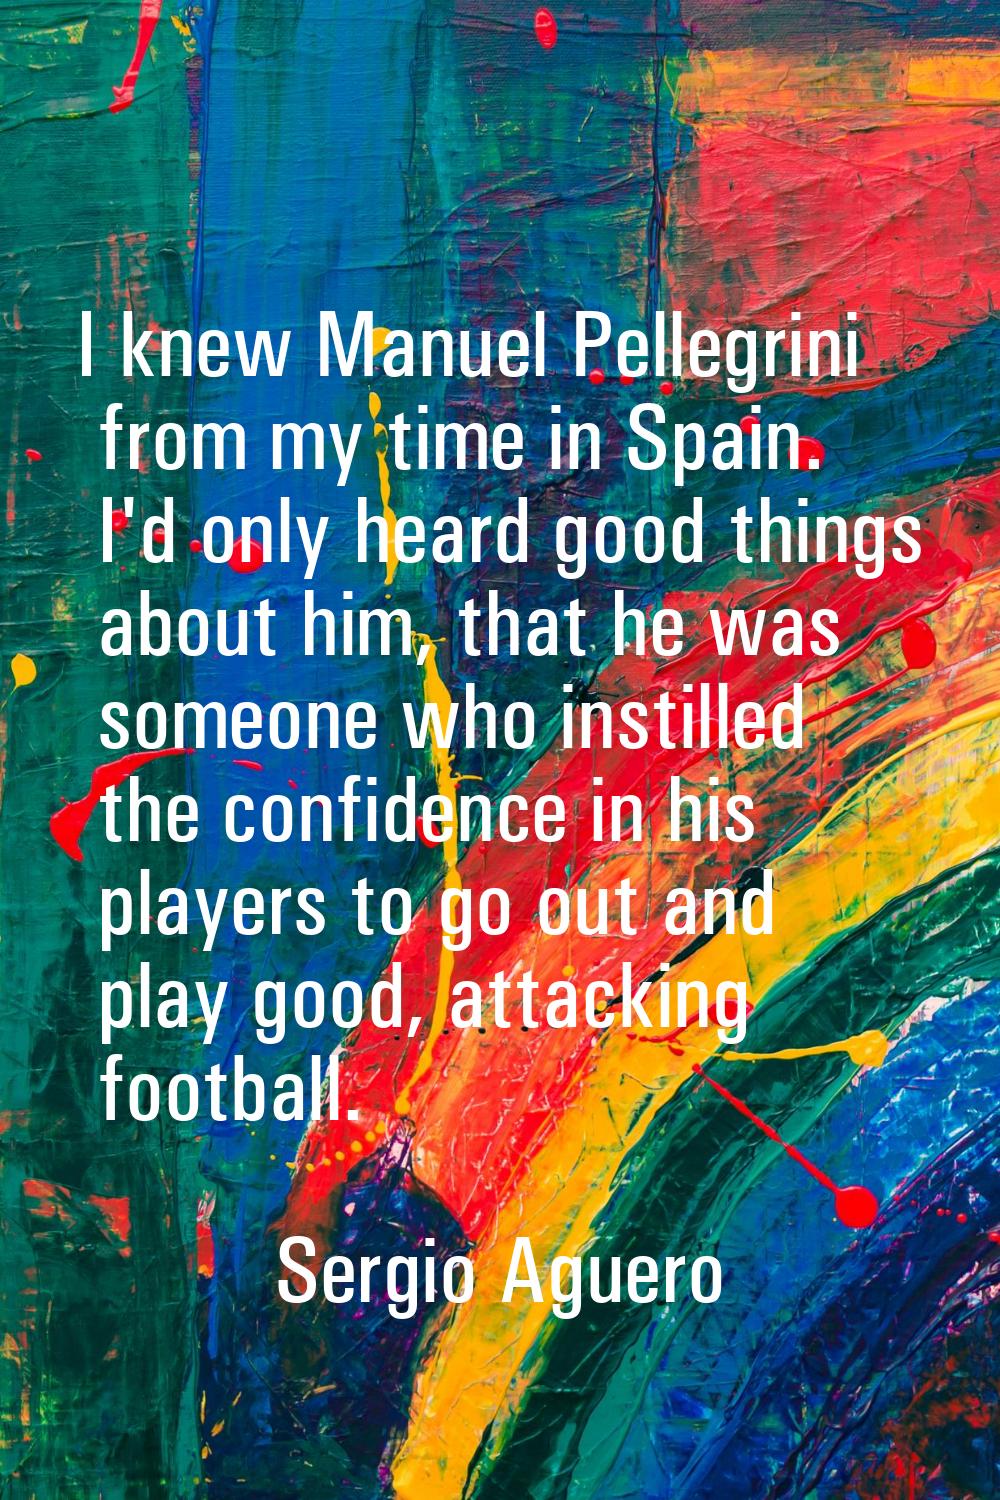 I knew Manuel Pellegrini from my time in Spain. I'd only heard good things about him, that he was s